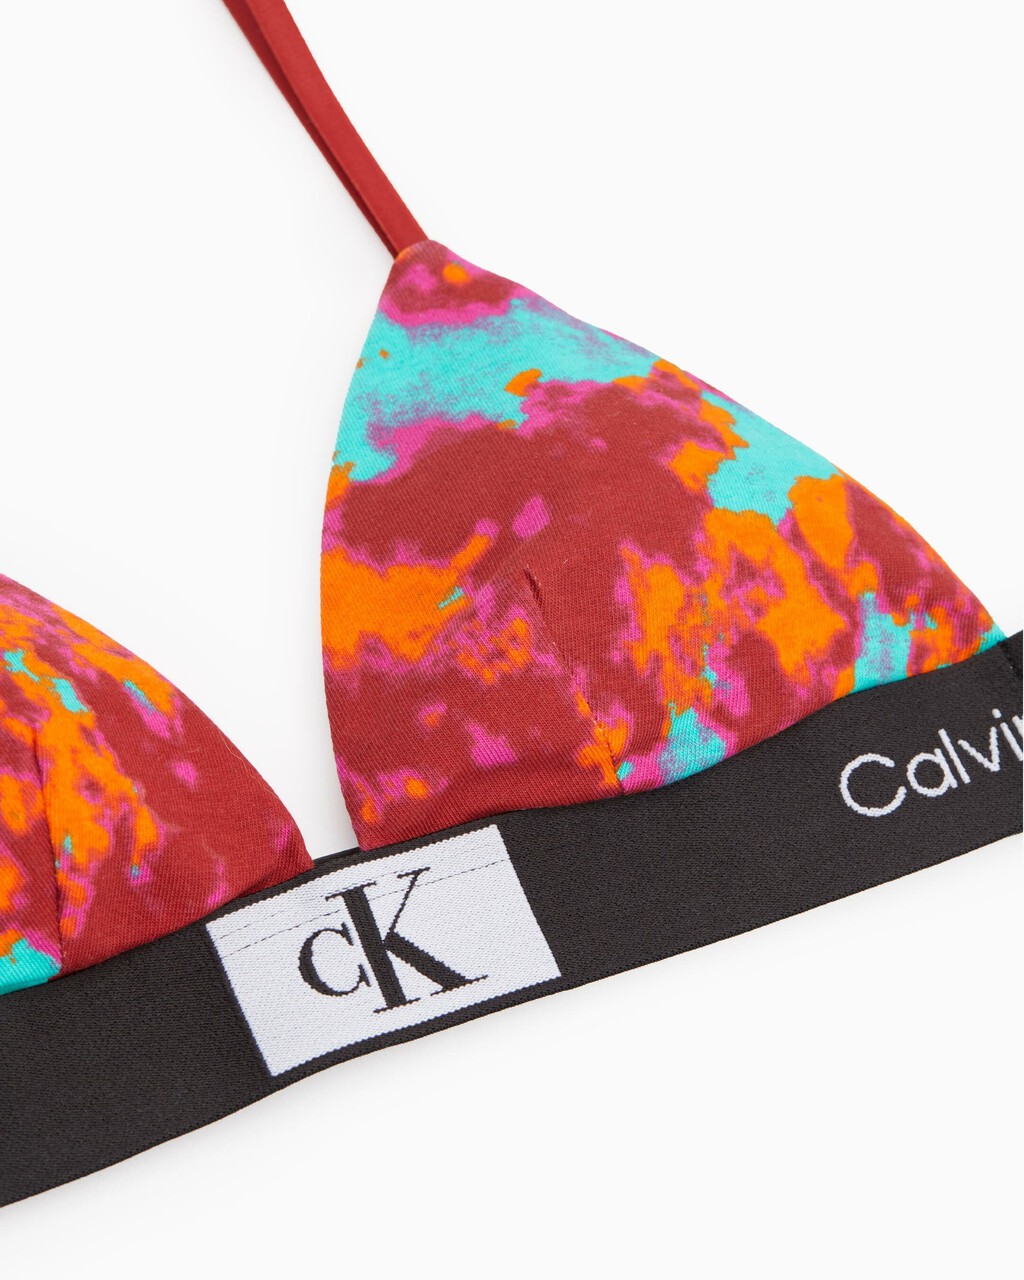 Calvin Klein 1996 Lightly Lined Triangle Bra, TEMPERATURE PRINT+FRESH PEPPERMINT, hi-res